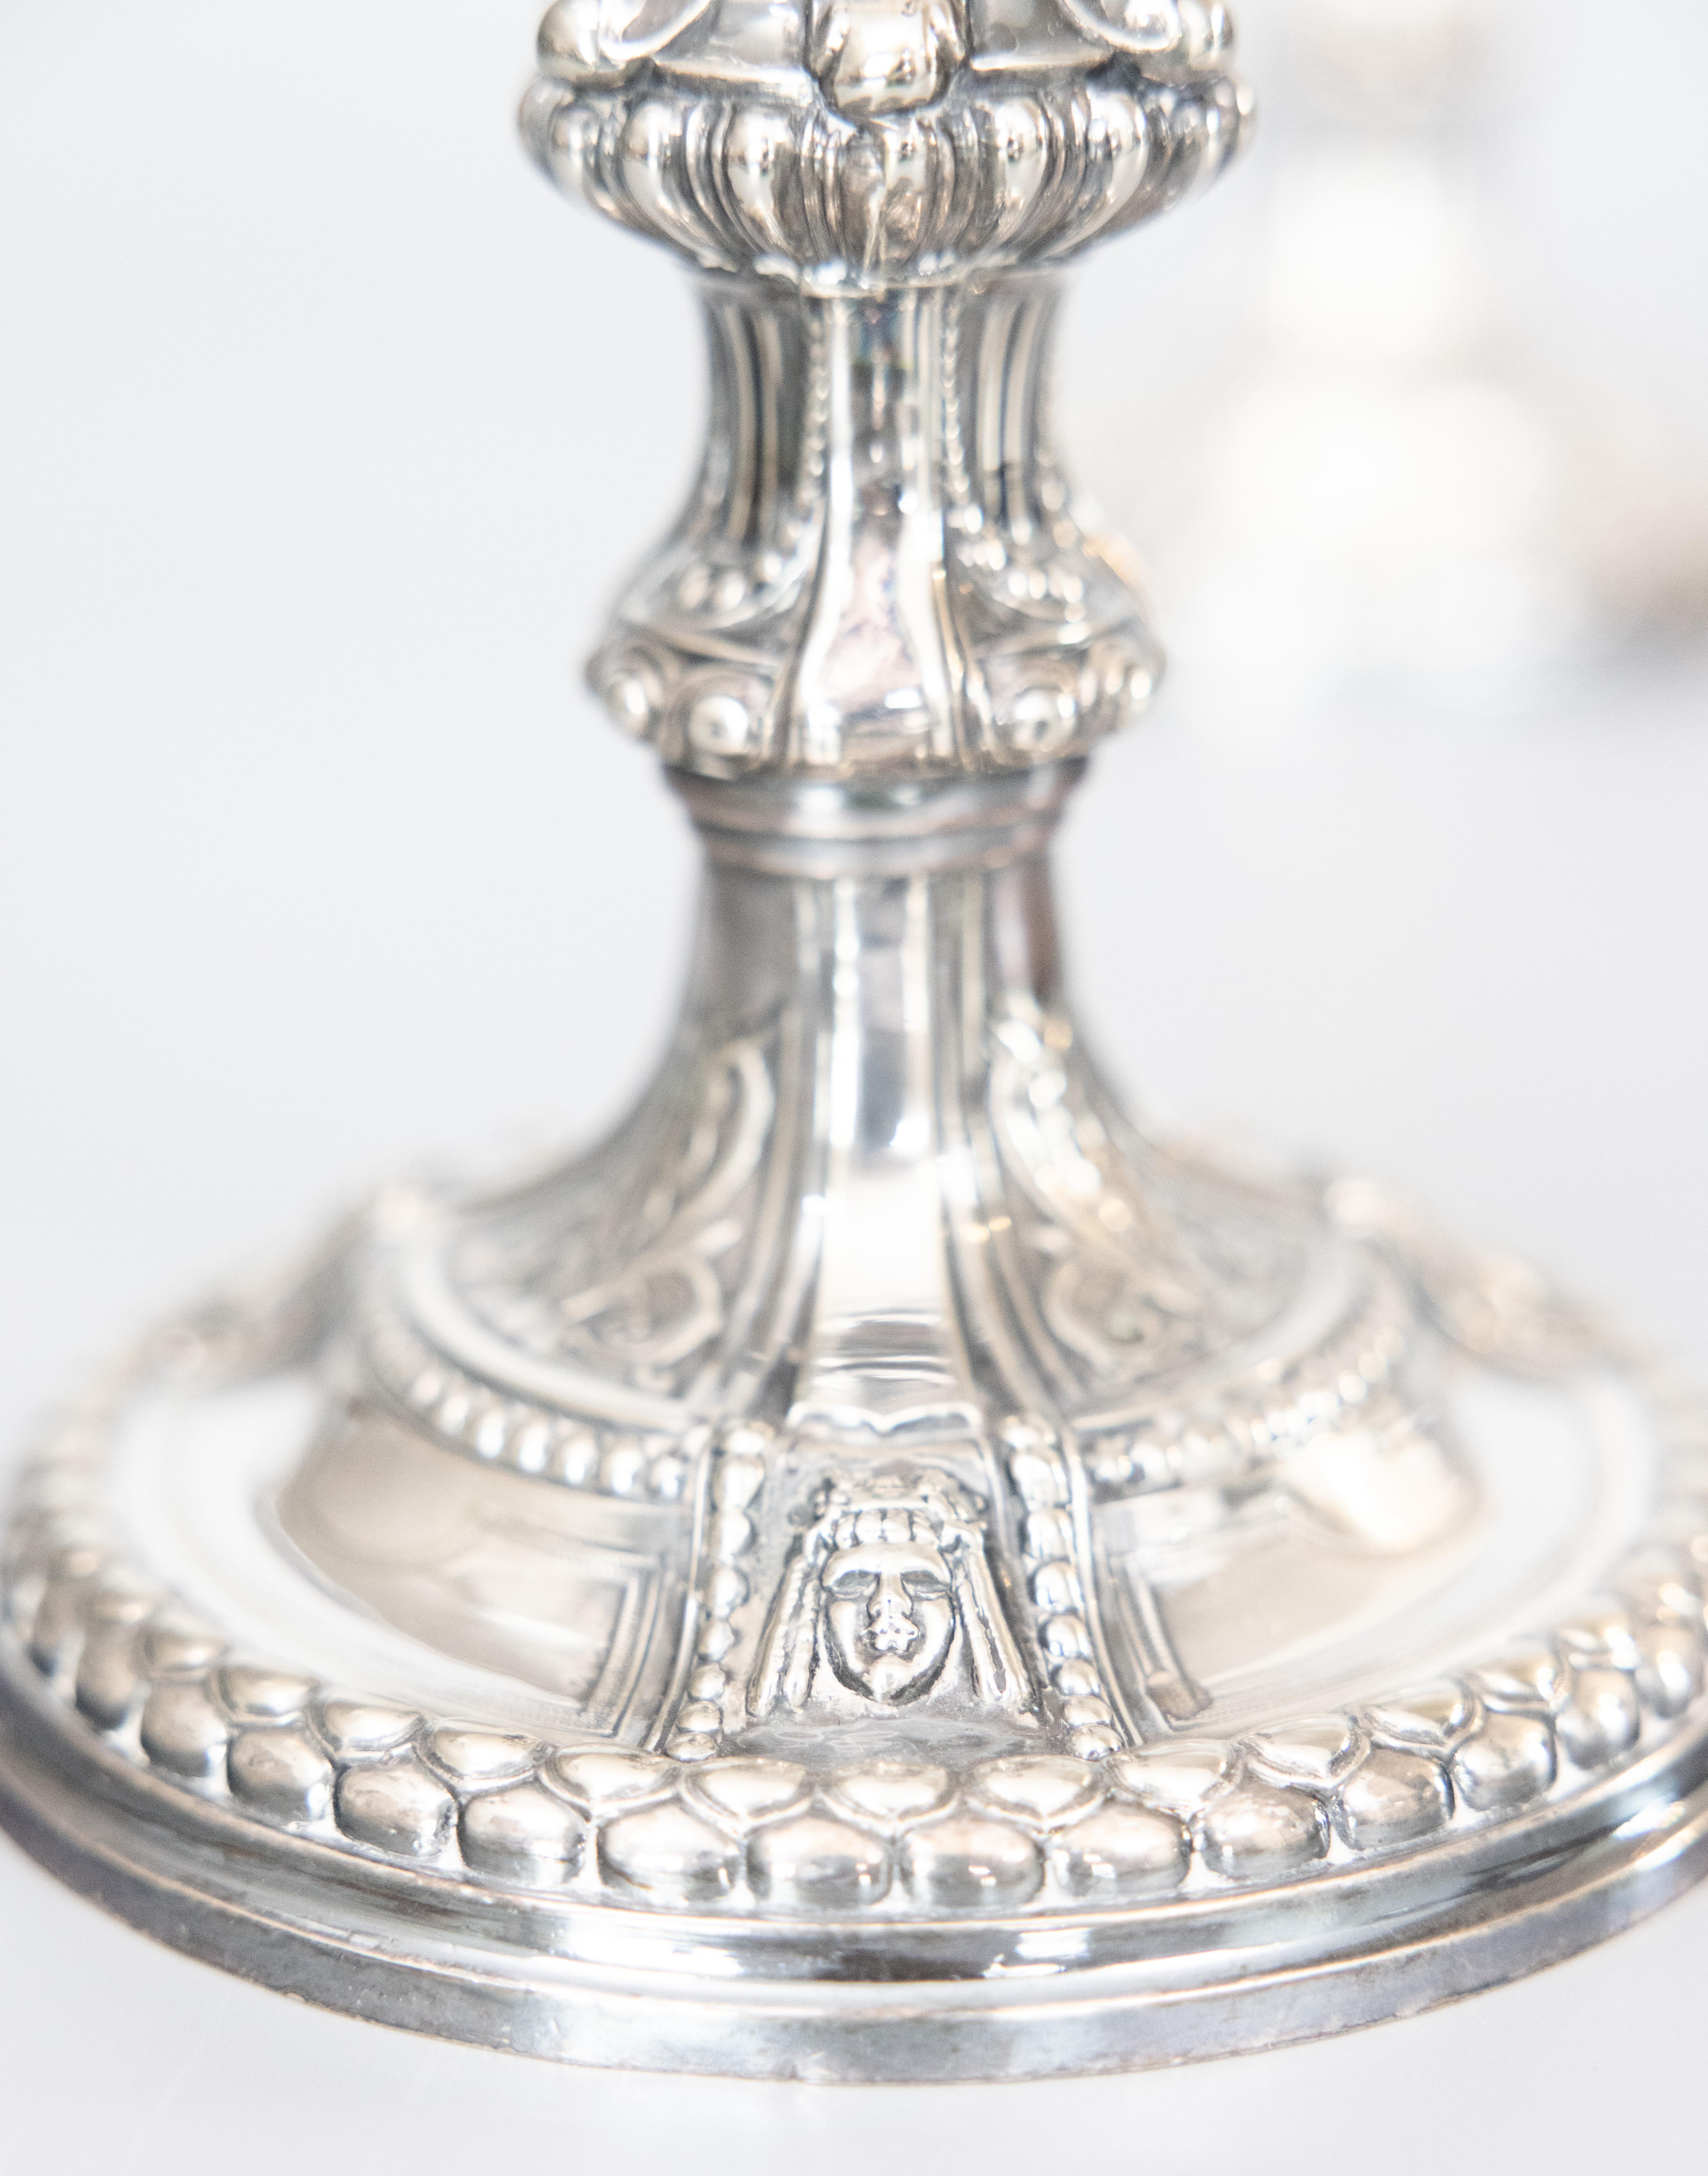 Early 20th Century Pair of Antique Neoclassical Style English Silver Plate Candlesticks c. 1900 For Sale